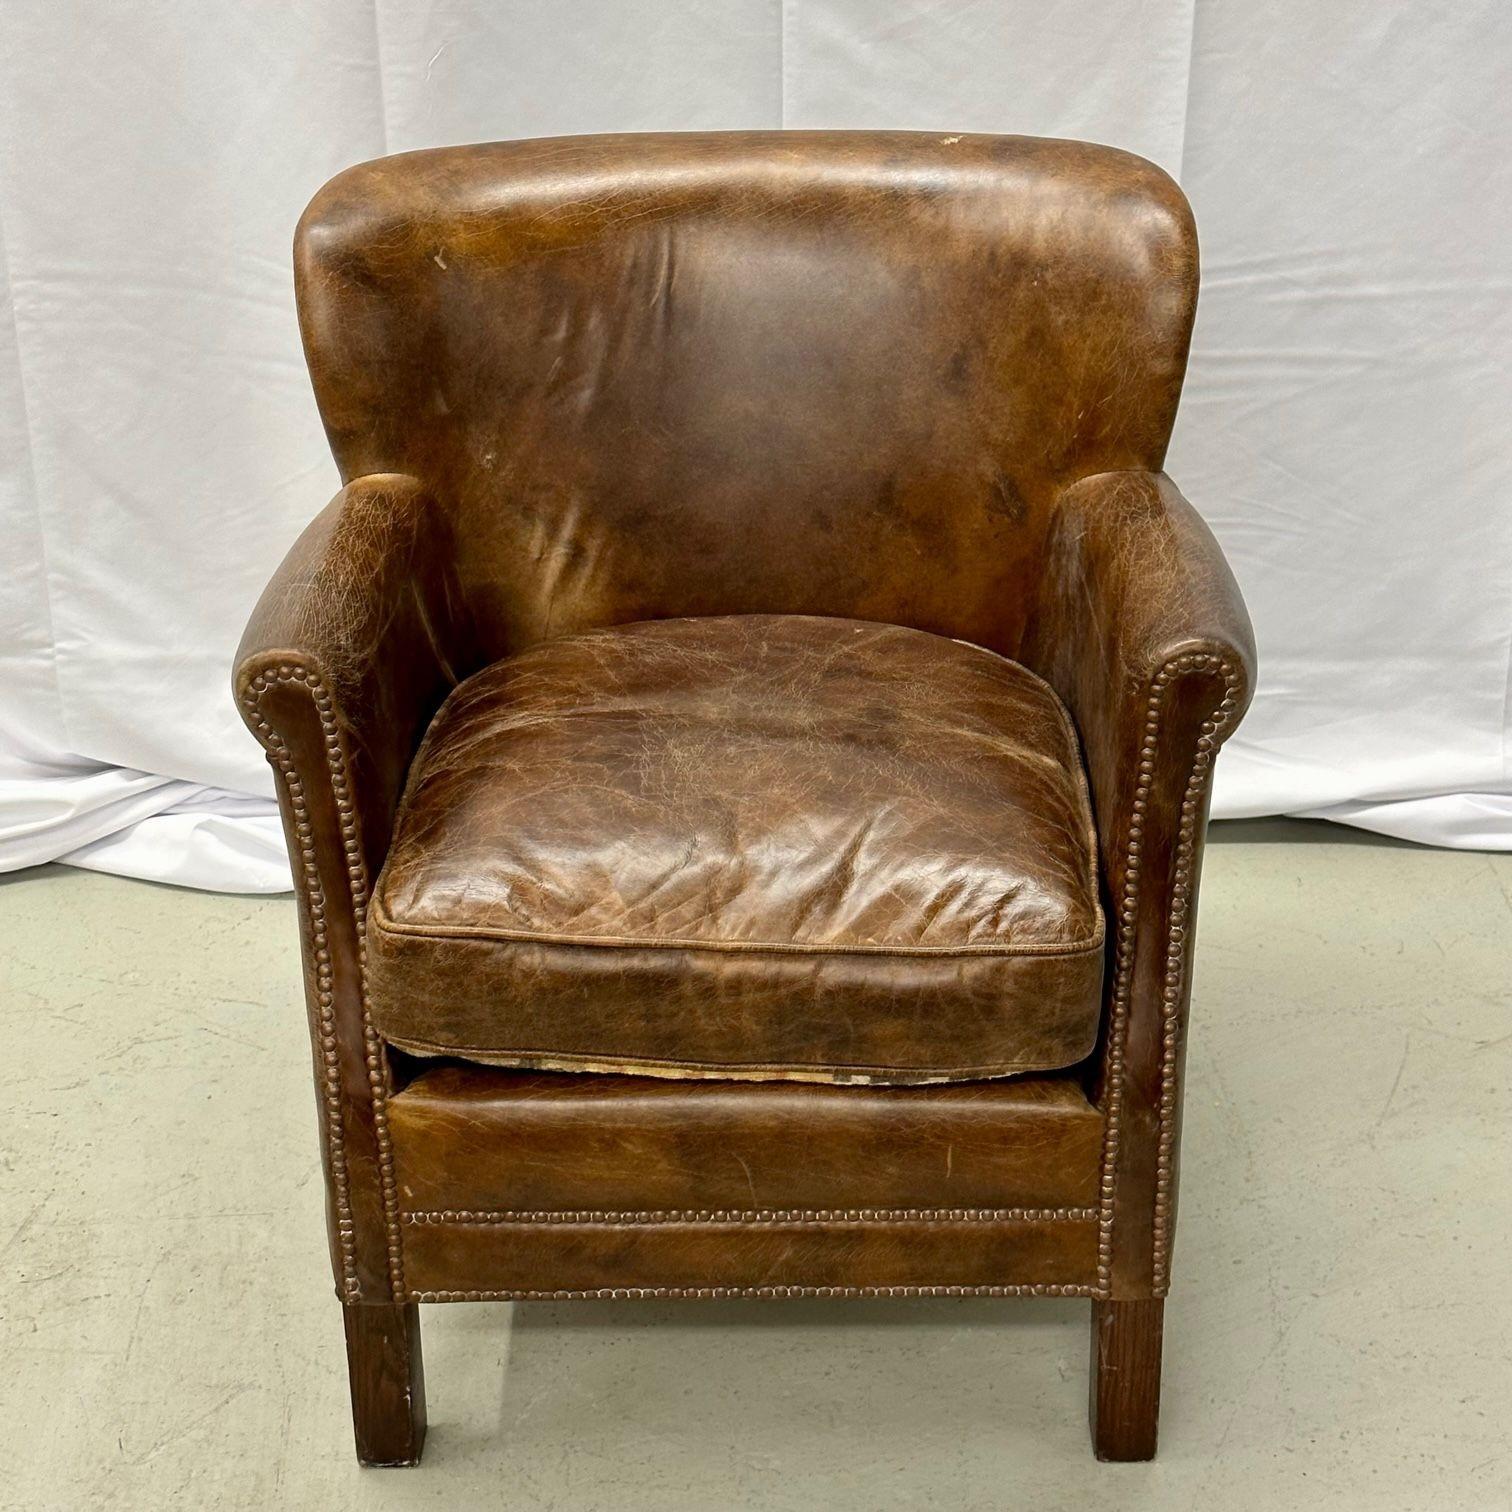 Petite Danish Style Distressed Leather Club / Lounge / Arm / Desk Chair
Petite Distressed Leather Club / Lounge / Arm Chair, Danish Style
A tasteful Georgian style arm or small lounge chair bearing beautifully distressed leather. The low fan back